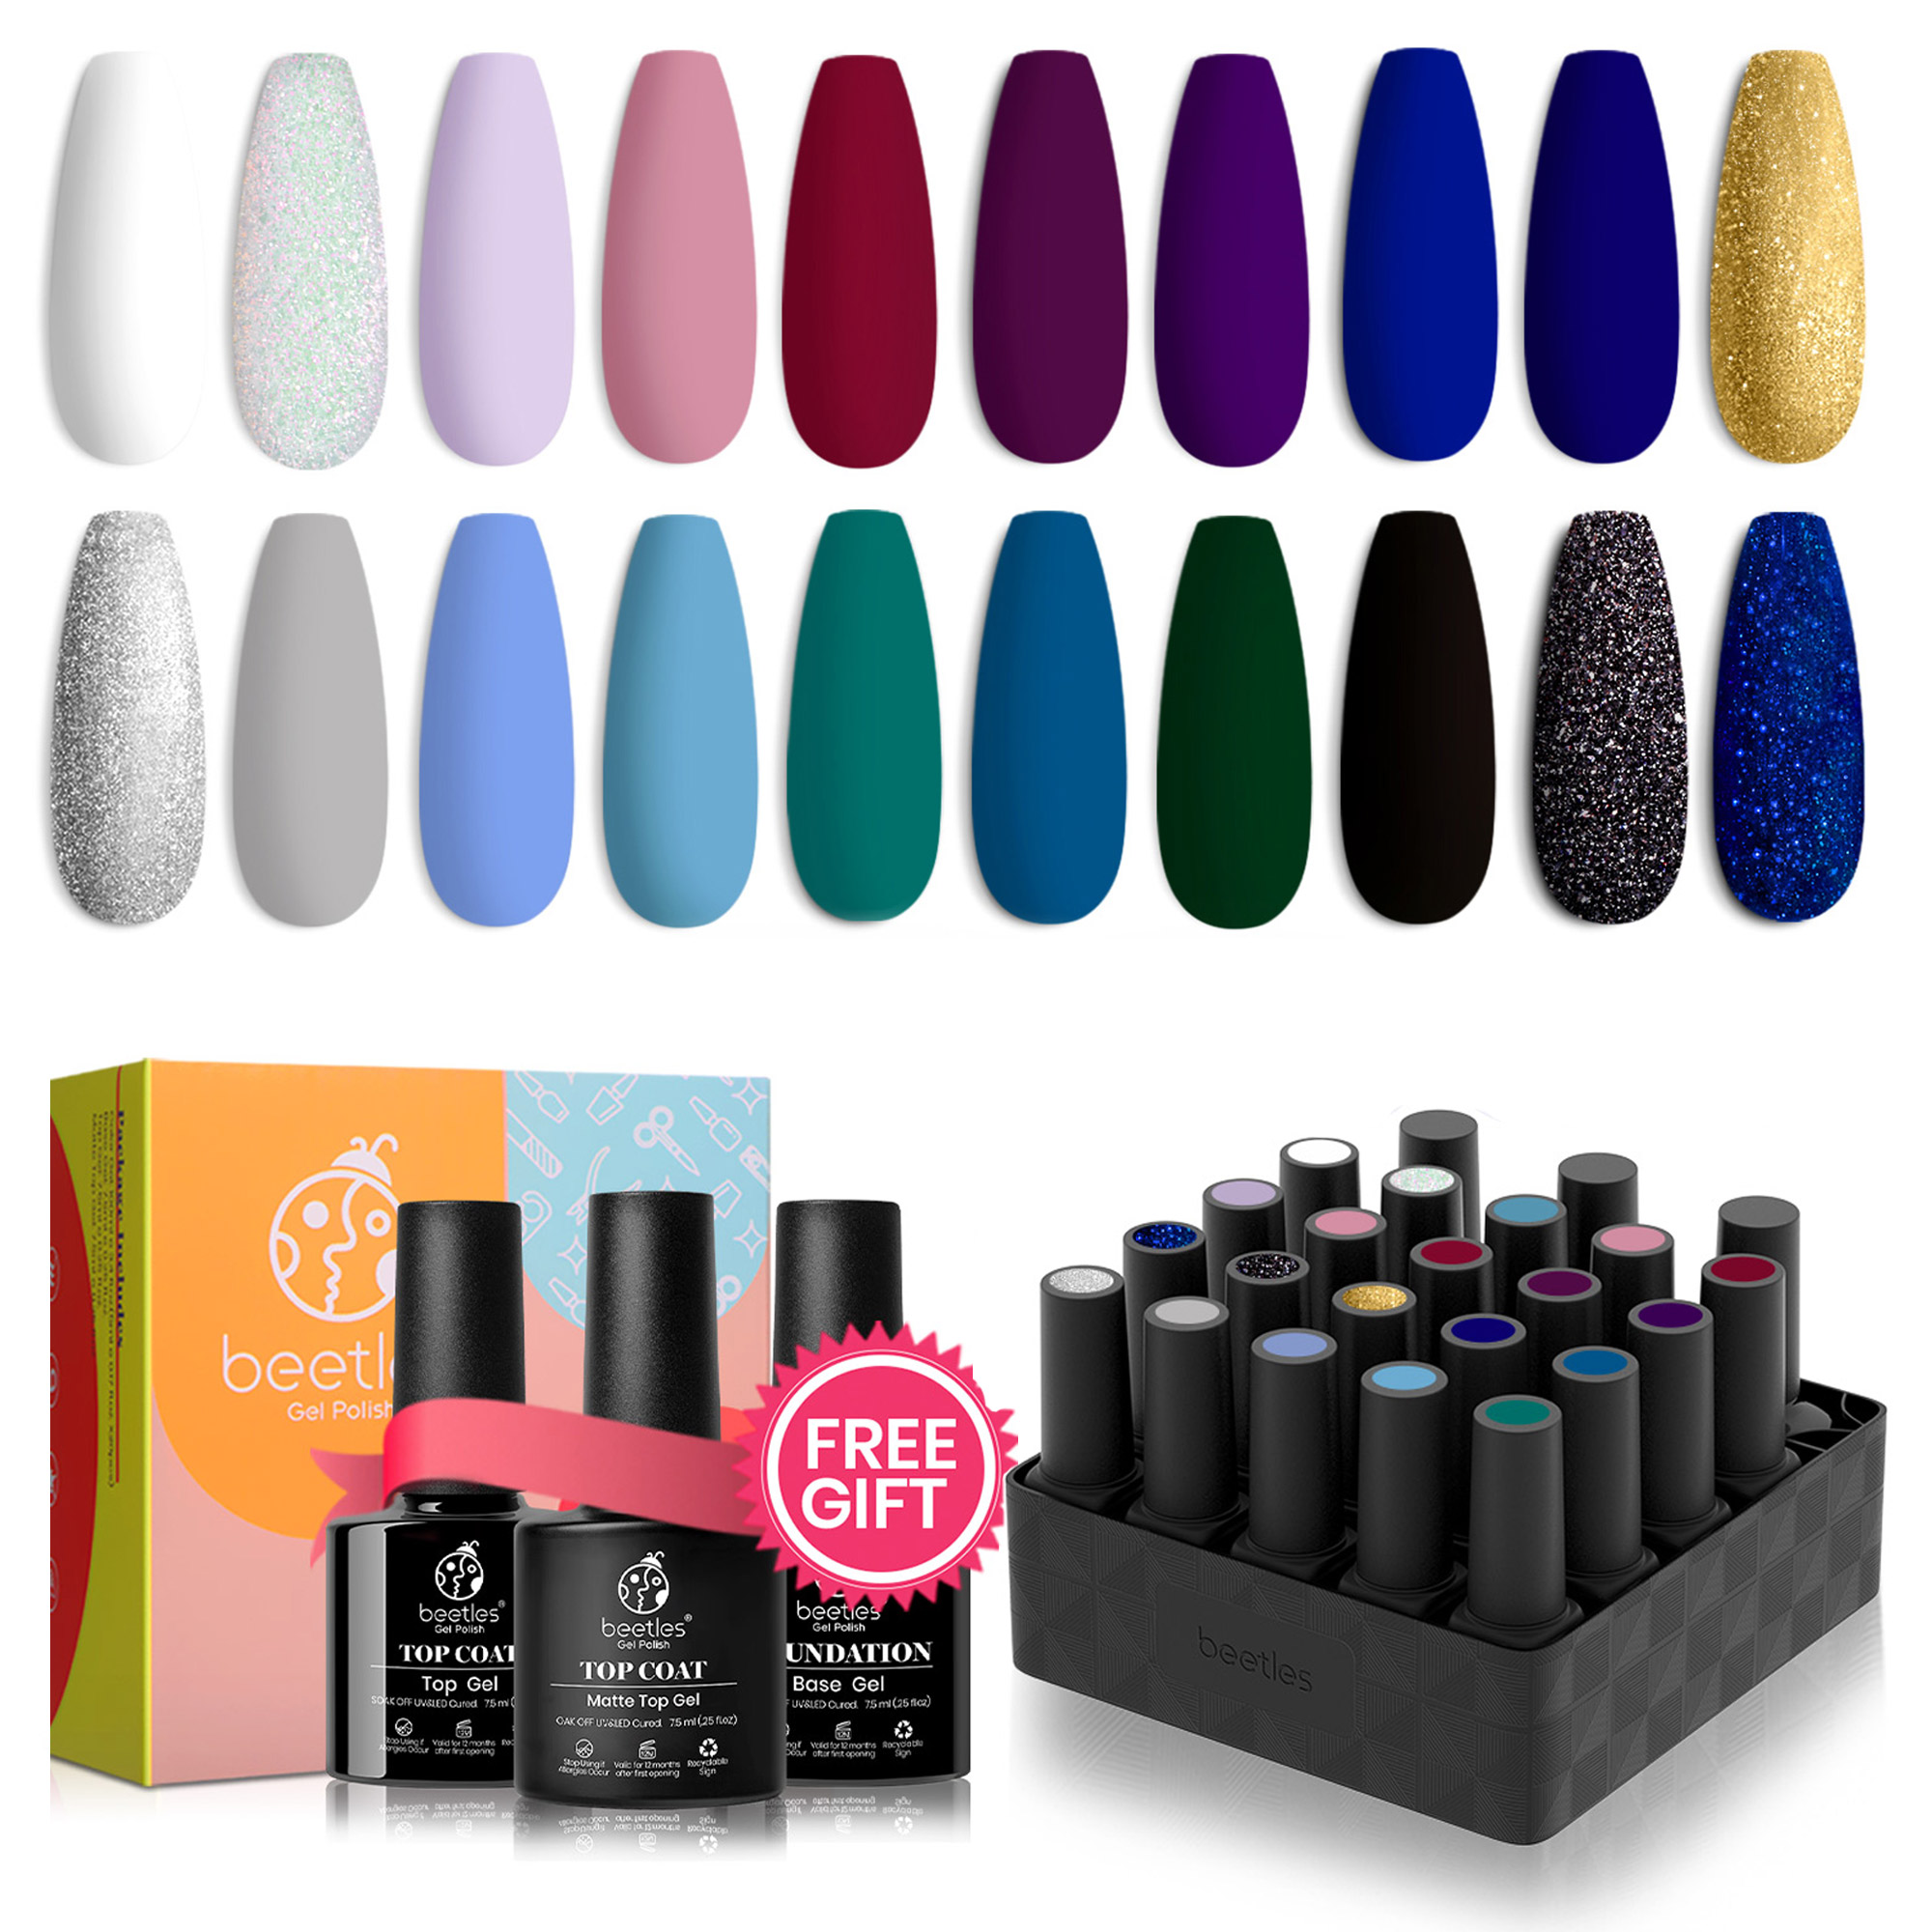 Celestial - 20 Gel Colors Set with Top and Base Coat (5ml/Each)